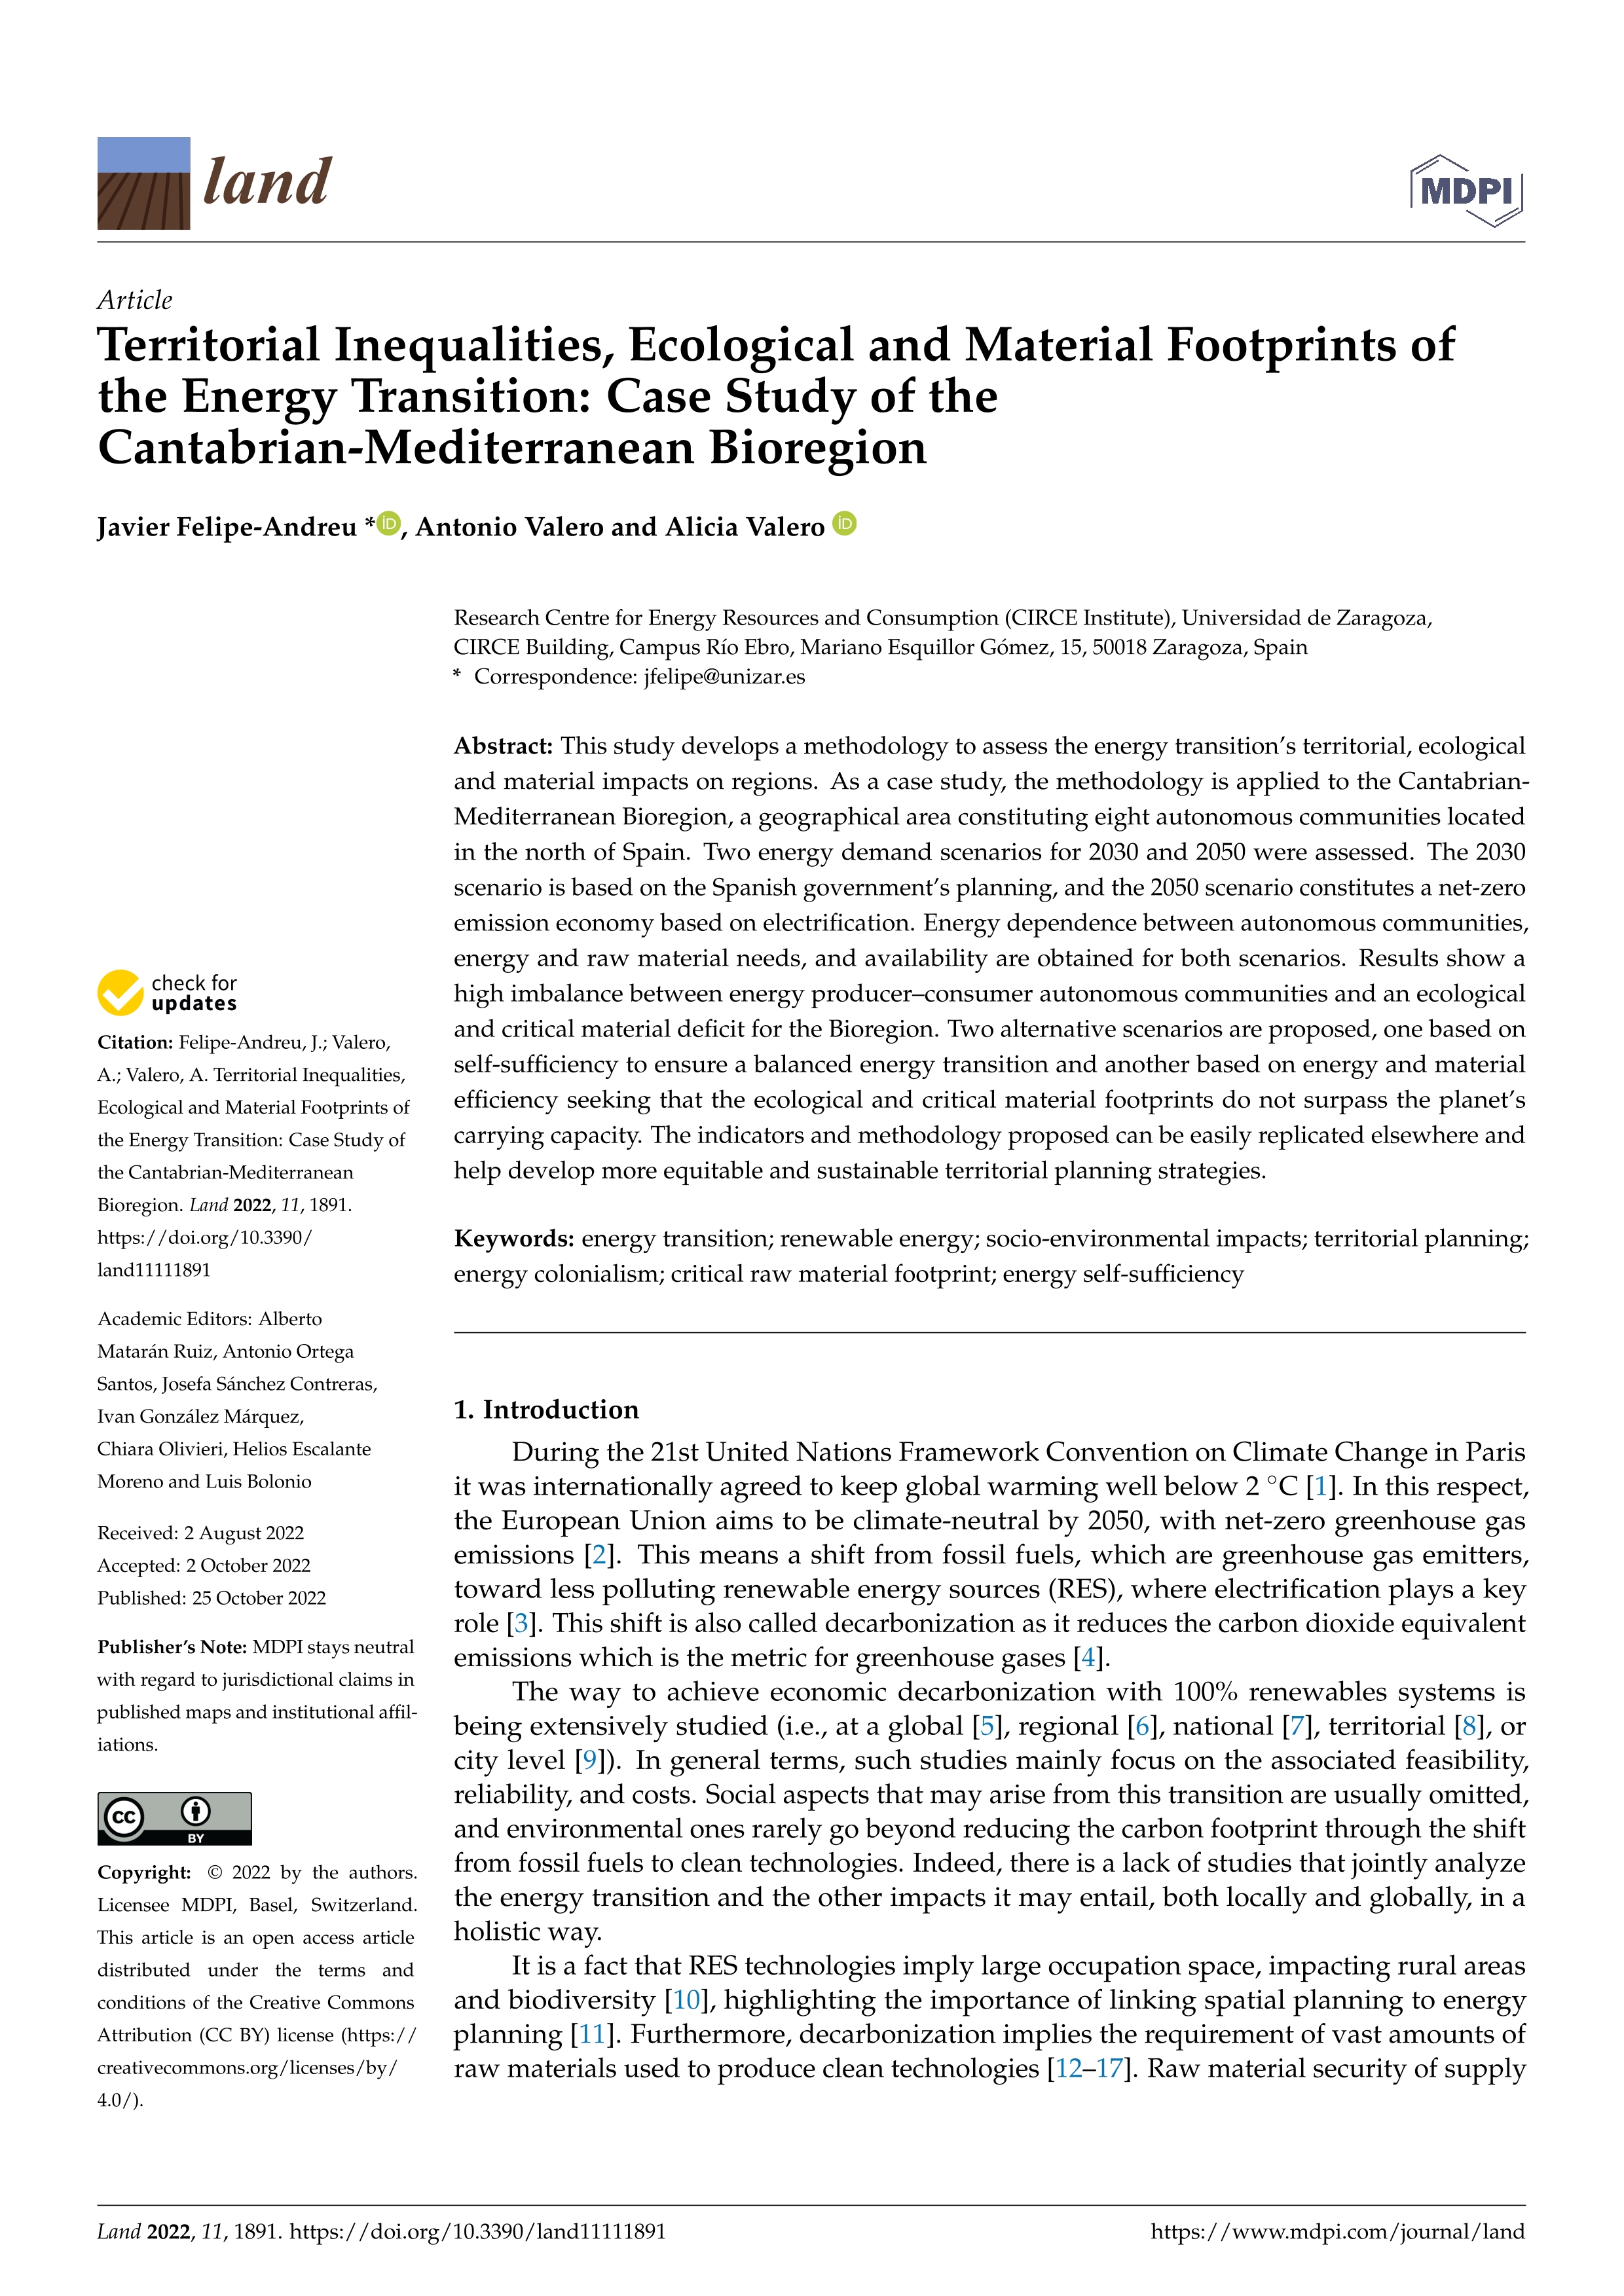 Territorial inequalities, ecological and material footprints of the energy transition: case study of the Cantabrian-Mediterranean Bioregion